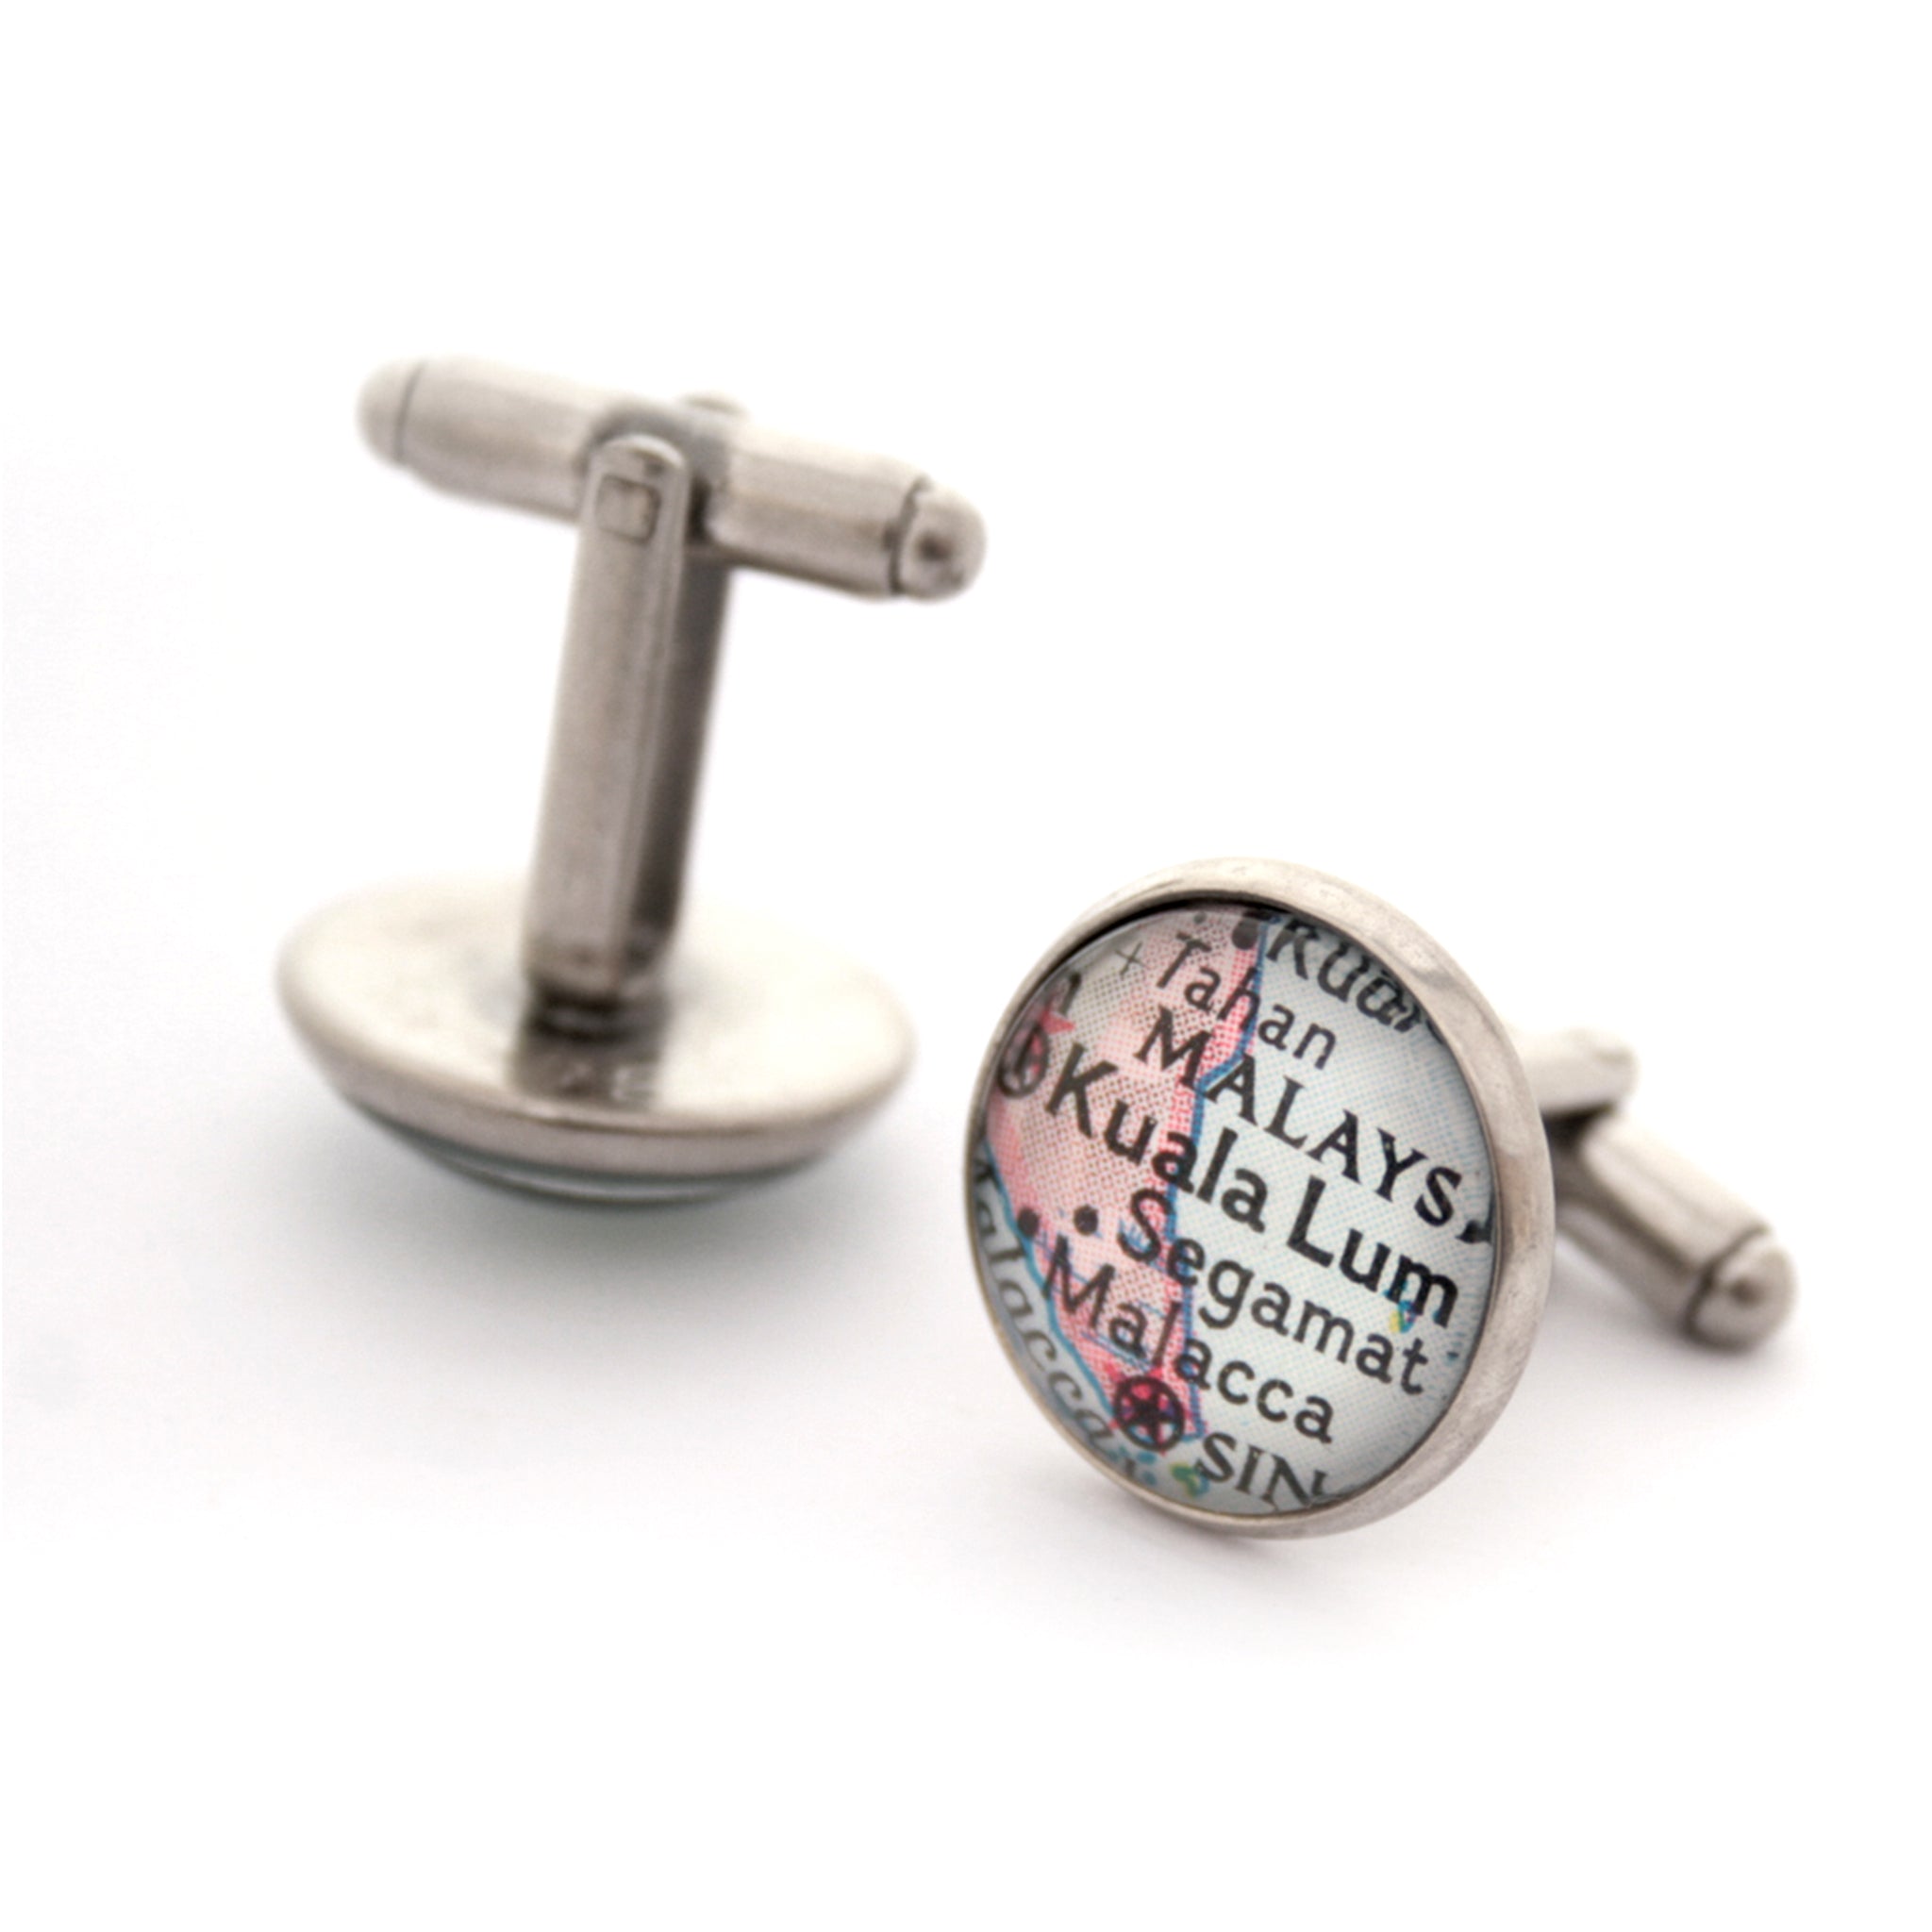 Personalised map cufflinks in antique silver colour featuring Kuala Lumpur